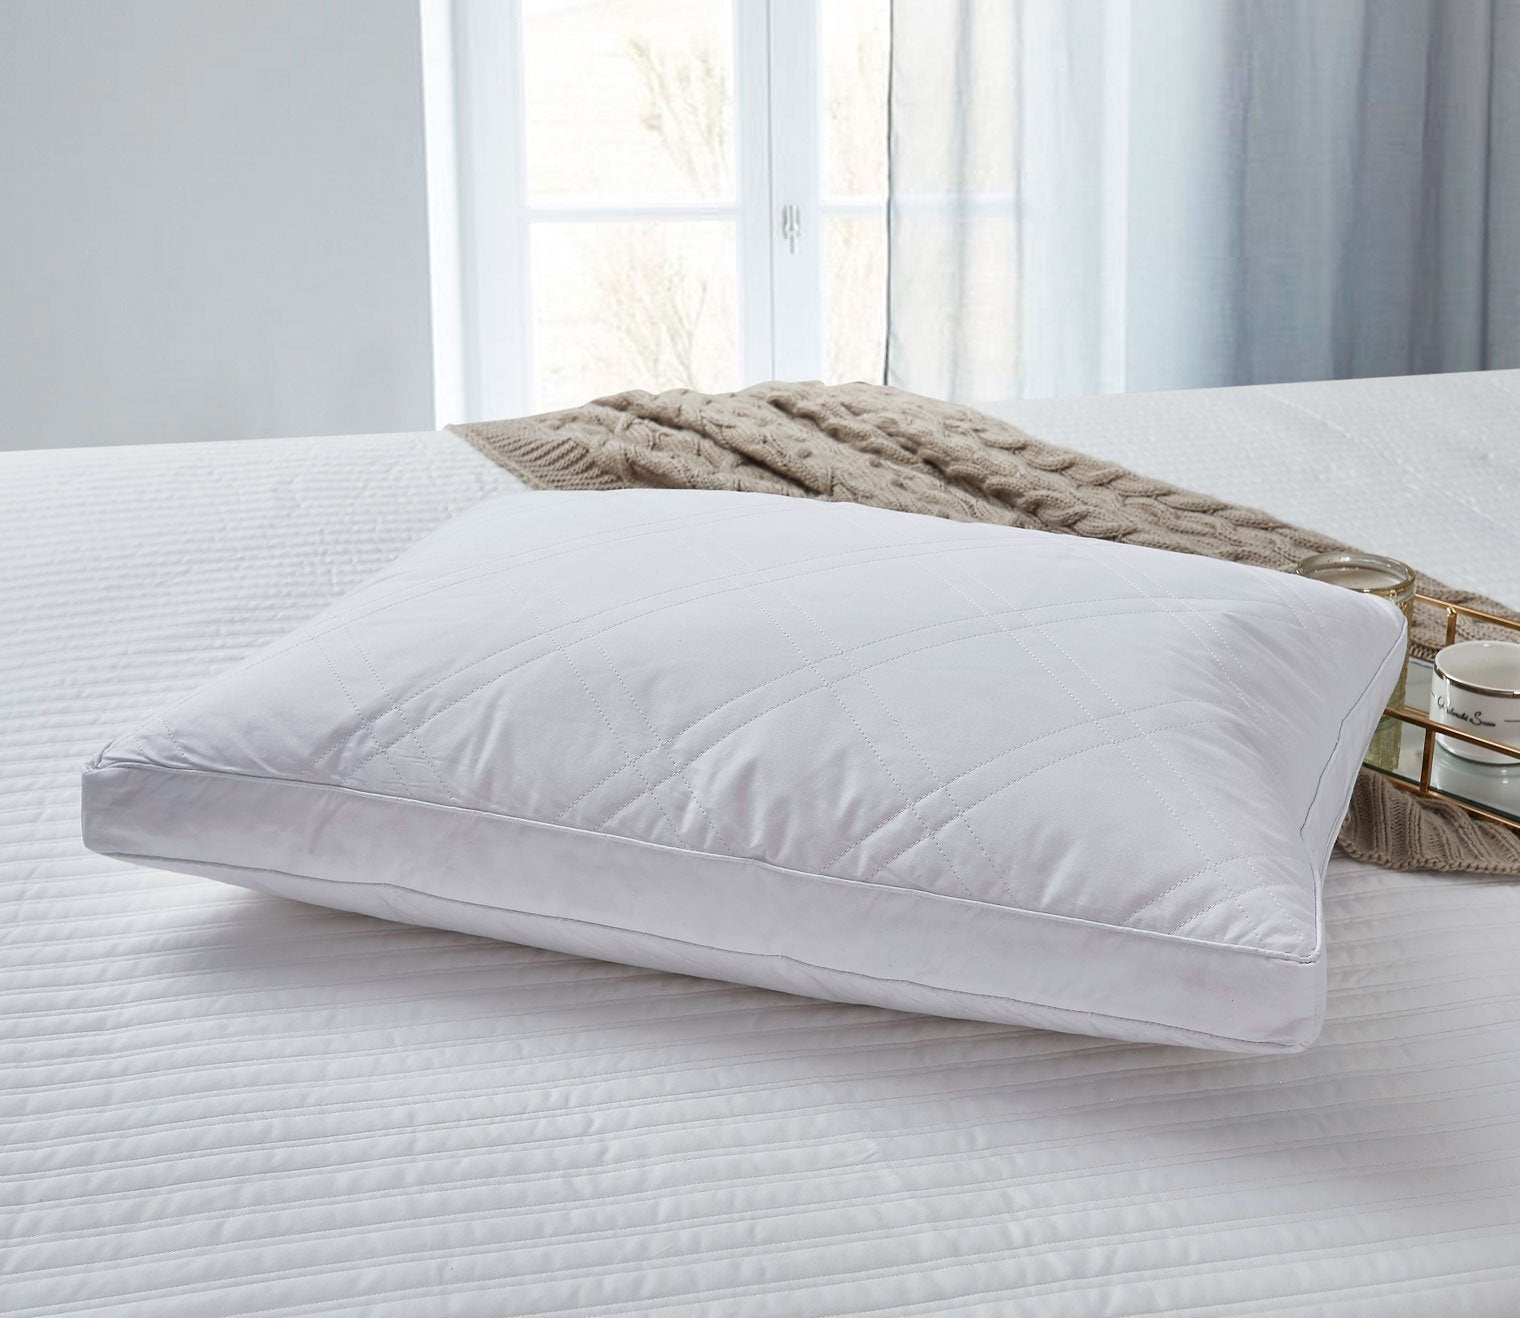 Quilted White Goose Feather and Down Pillow 2-Pack by Blue Ridge Home